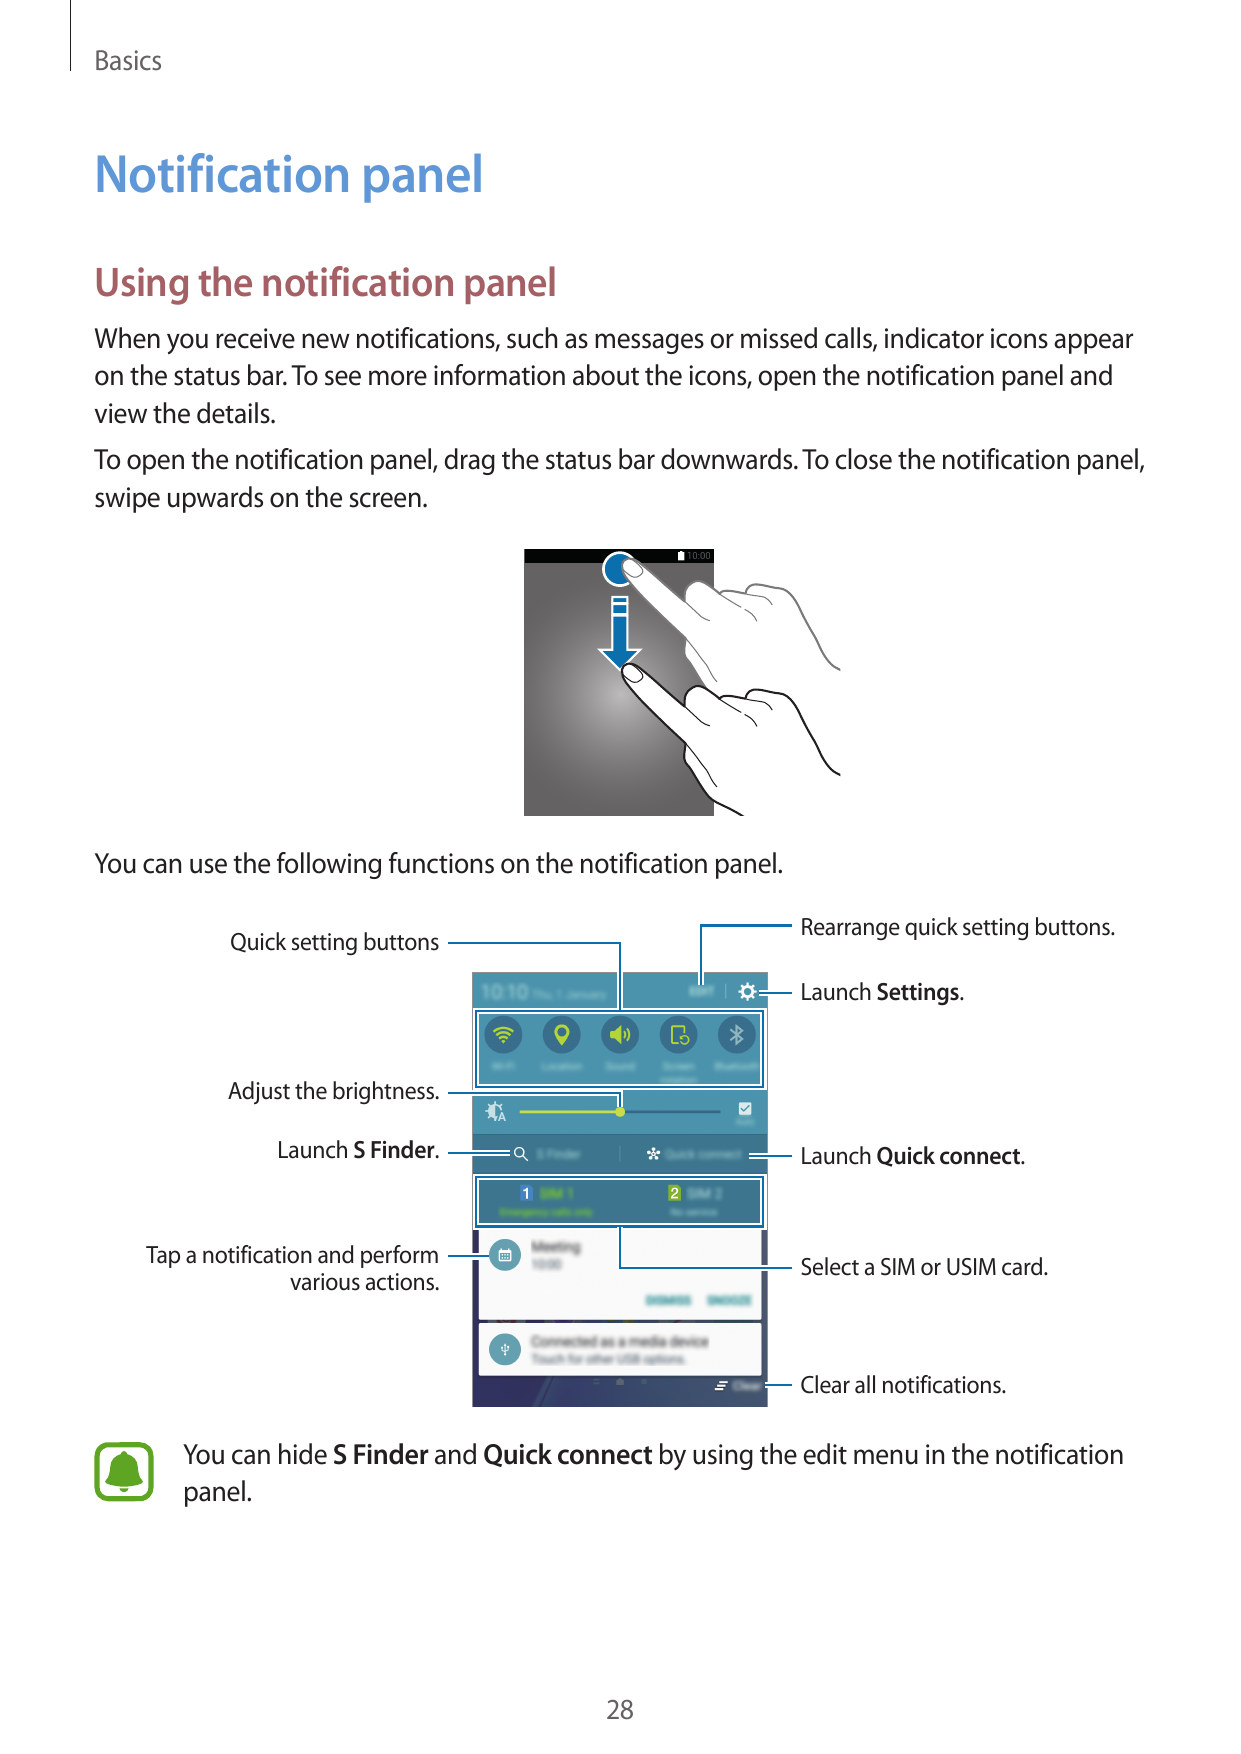 BasicsNotification panelUsing the notification panelWhen you receive new notifications, such as messages or missed calls, indica